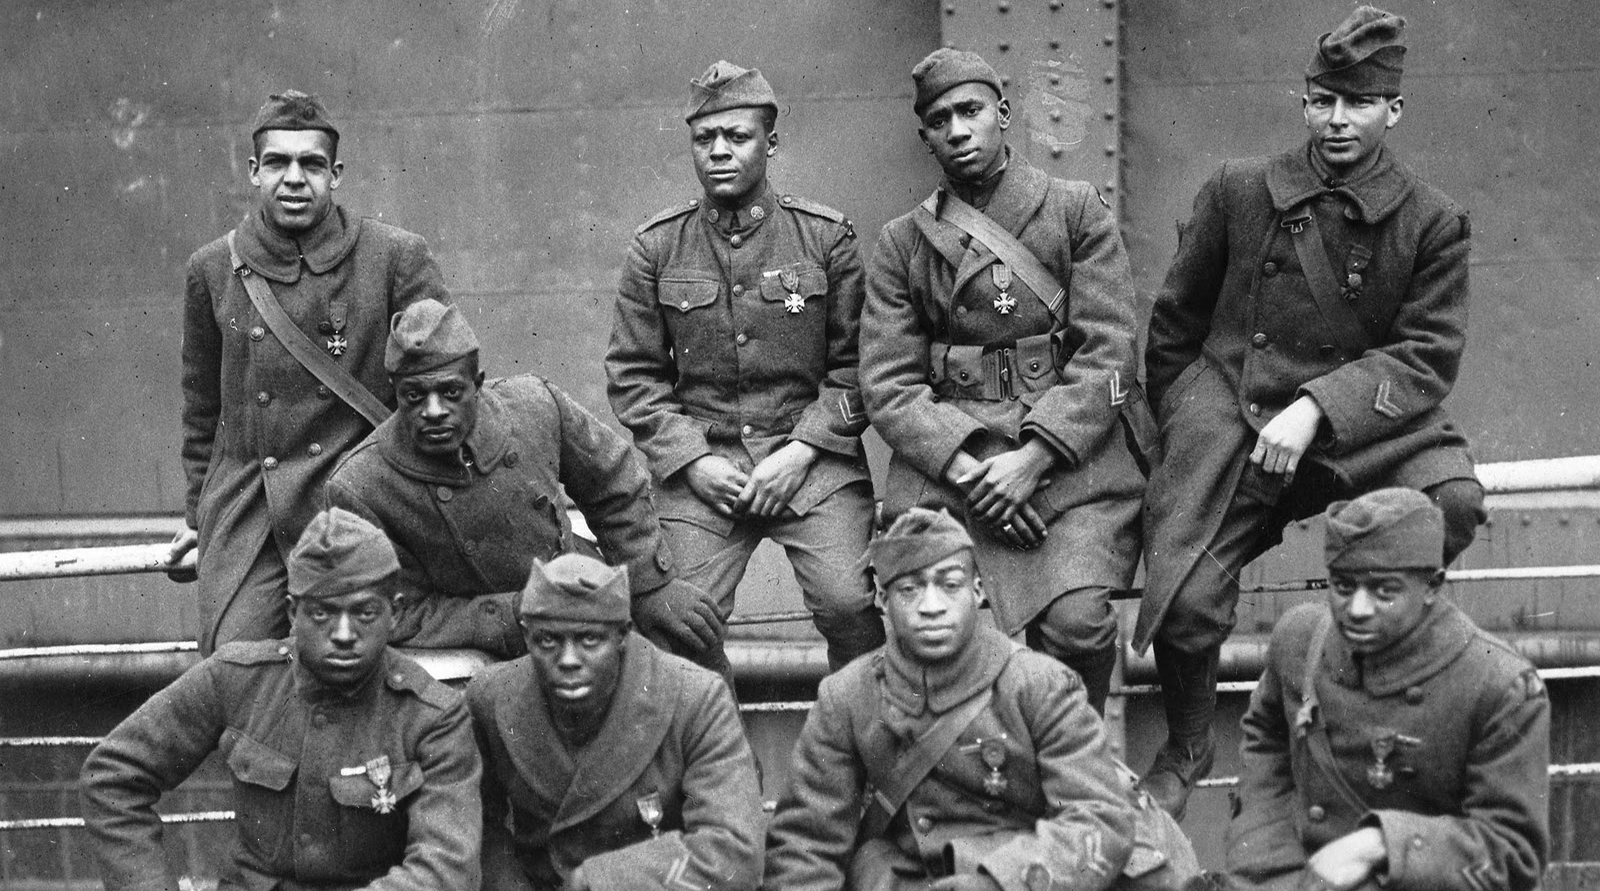 African American soldiers